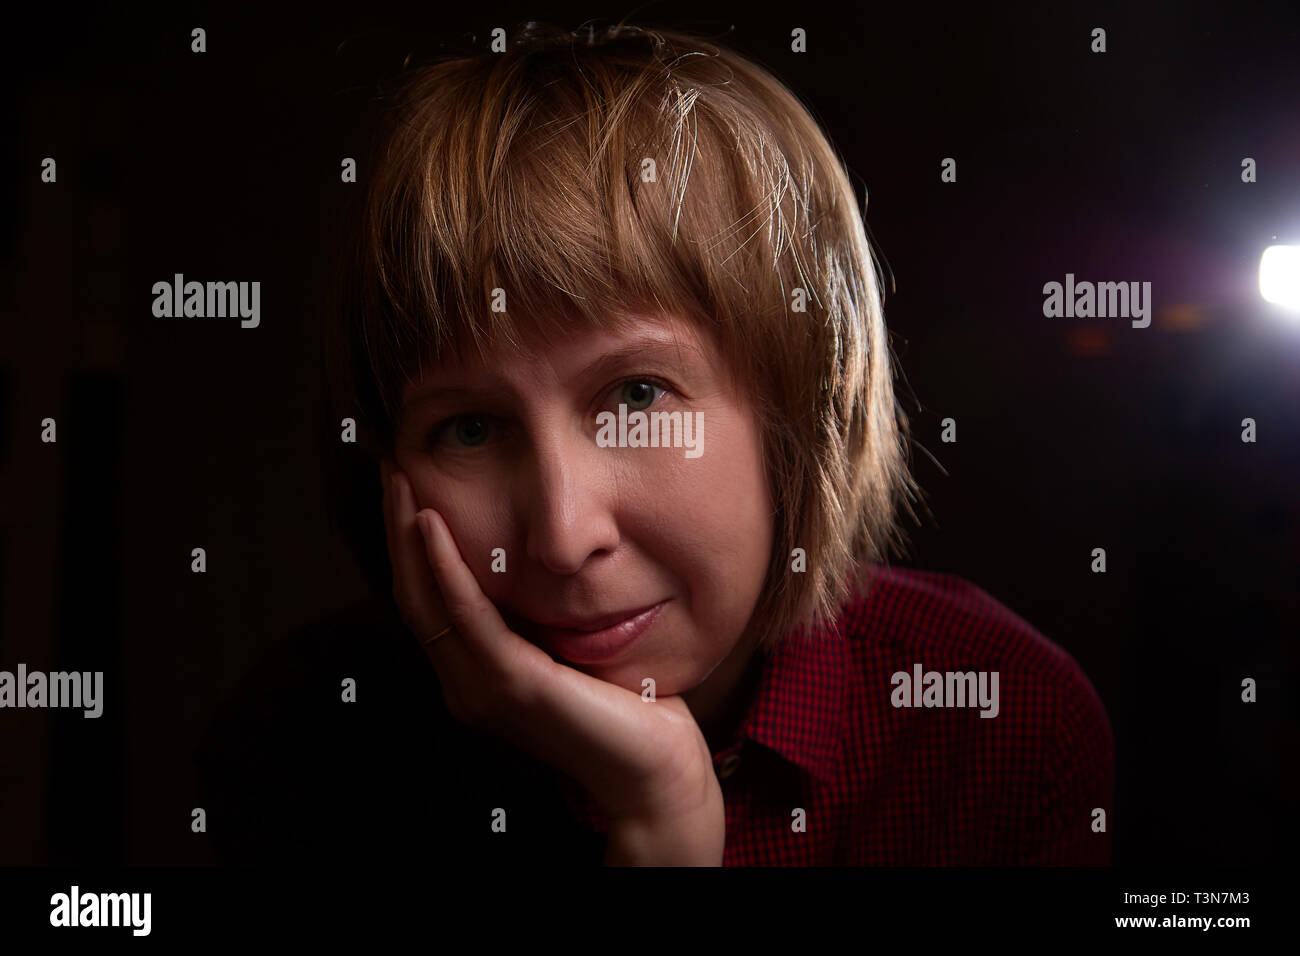 Portrait of ugly but sweet girl with chubby cheeks and dark background. Photo shoot of middle-aged women in the Studio with interesting backlight Stock Photo